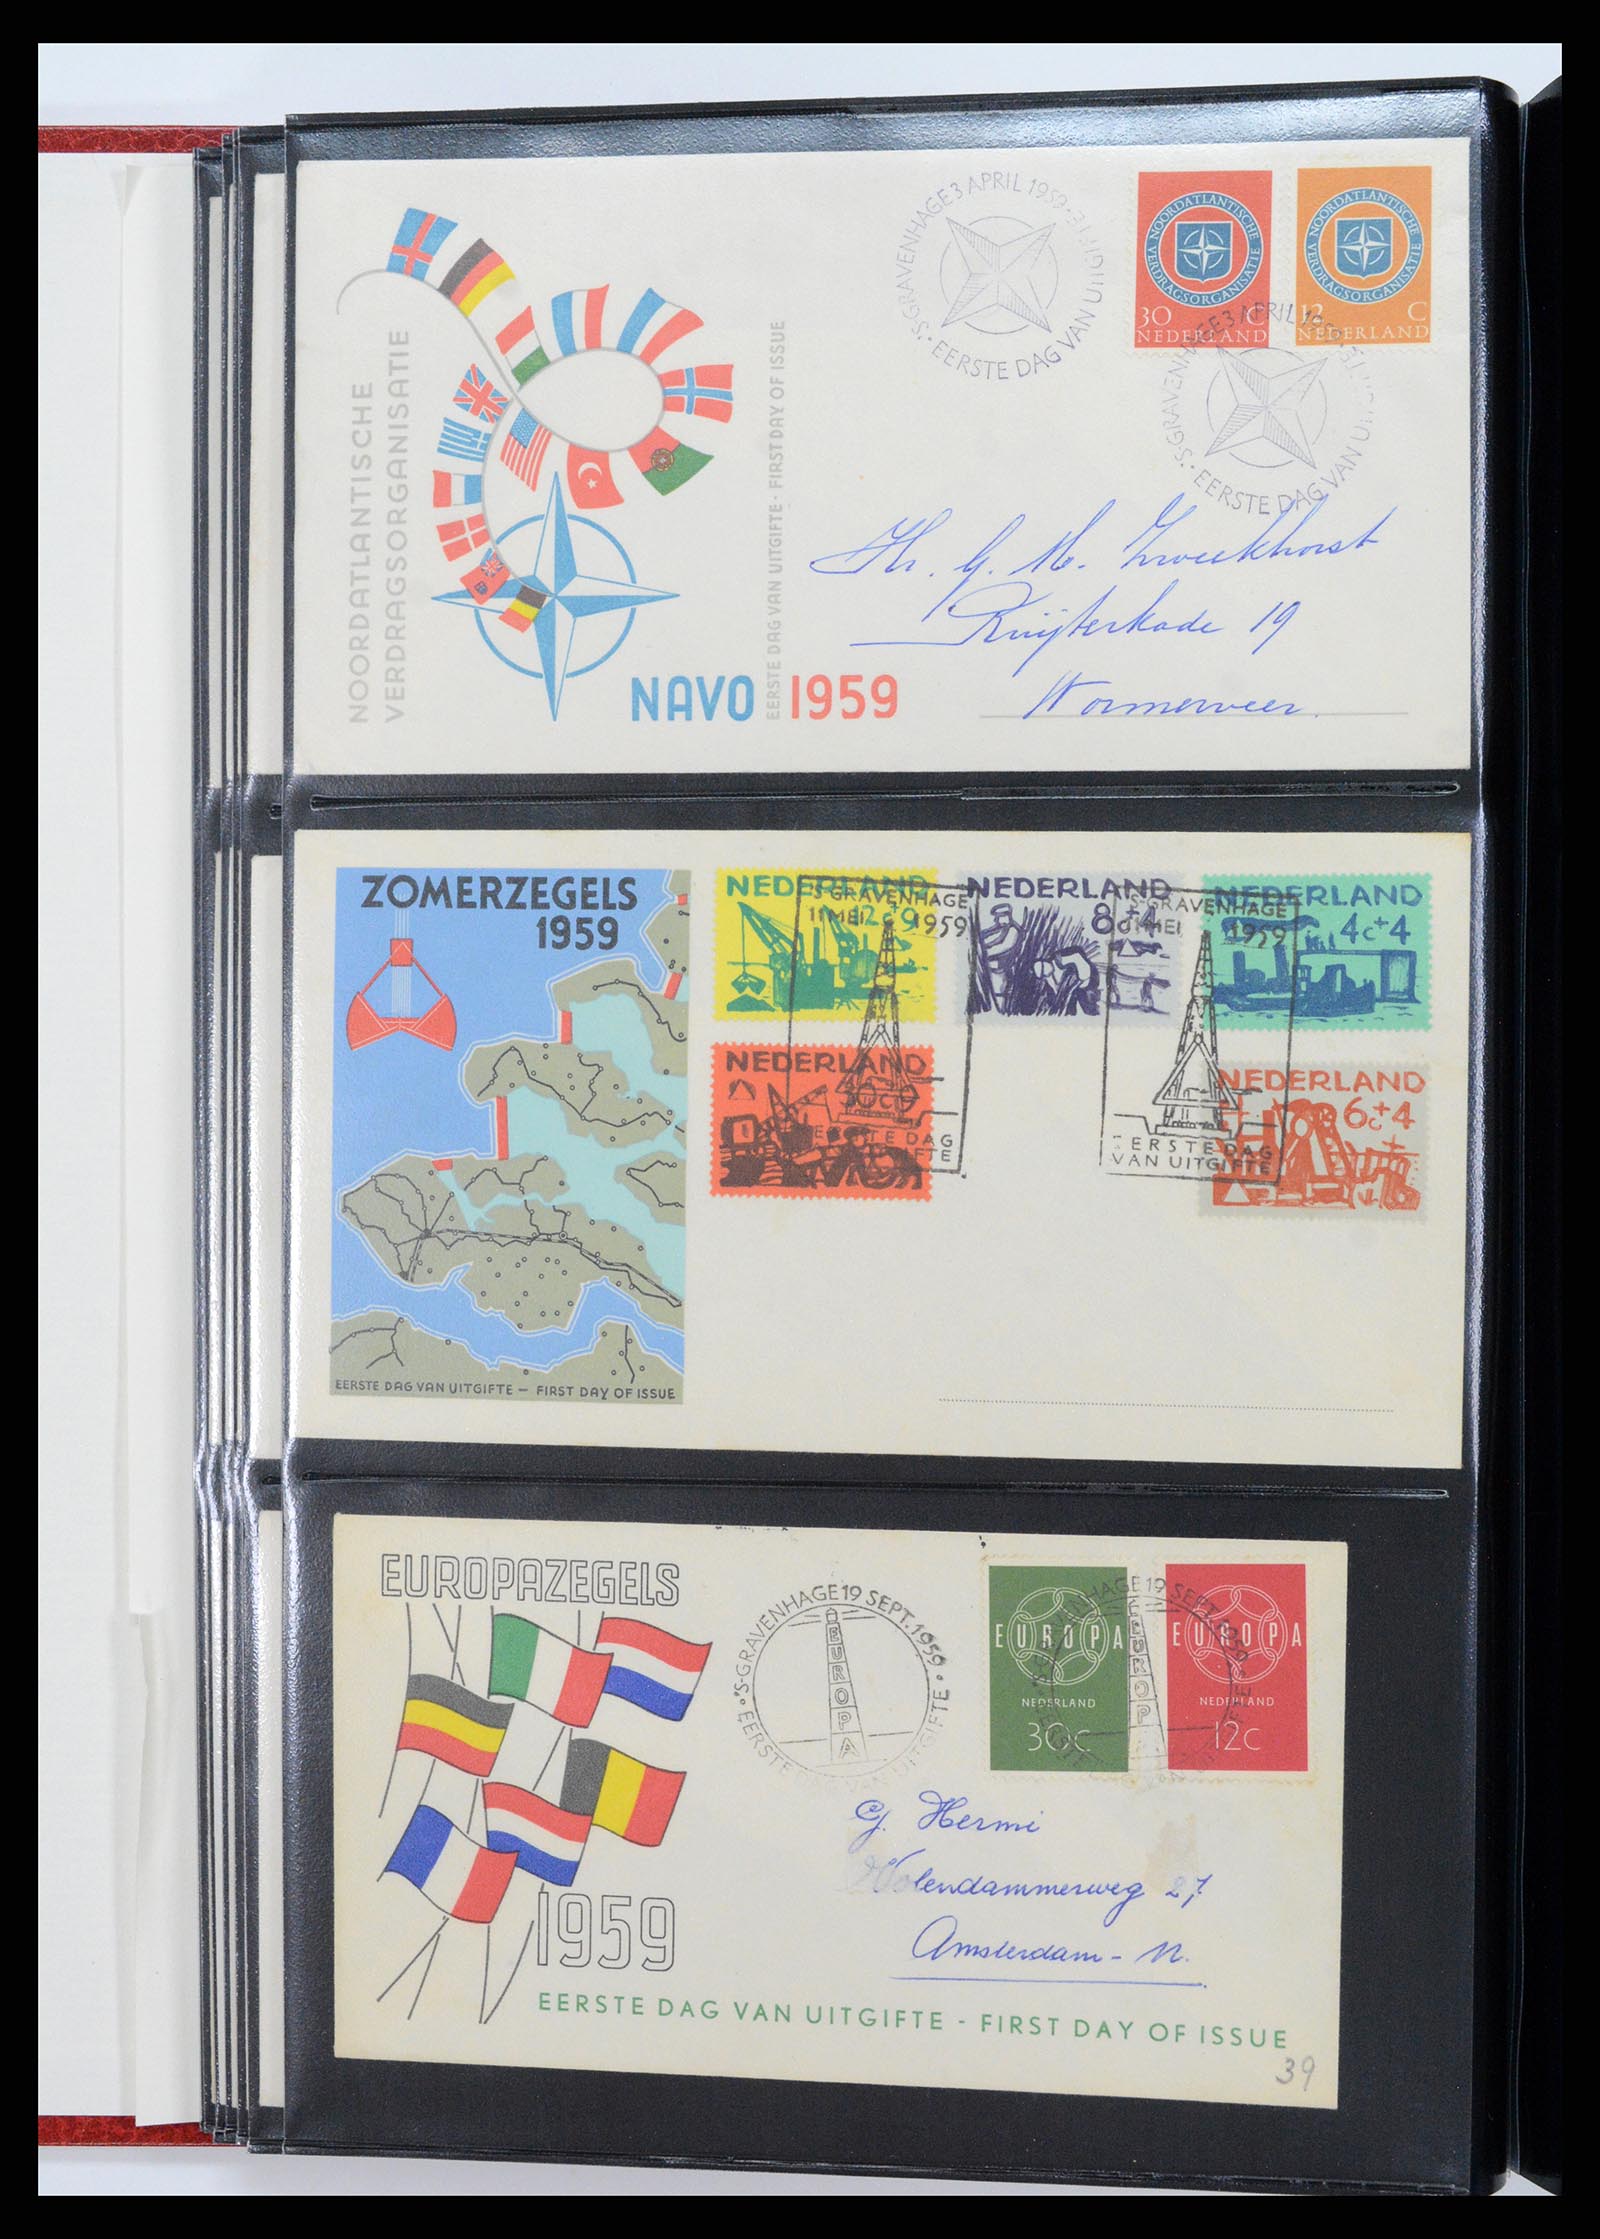 37484 015 - Stamp collection 37484 Netherlands FDC's 1950-1976.